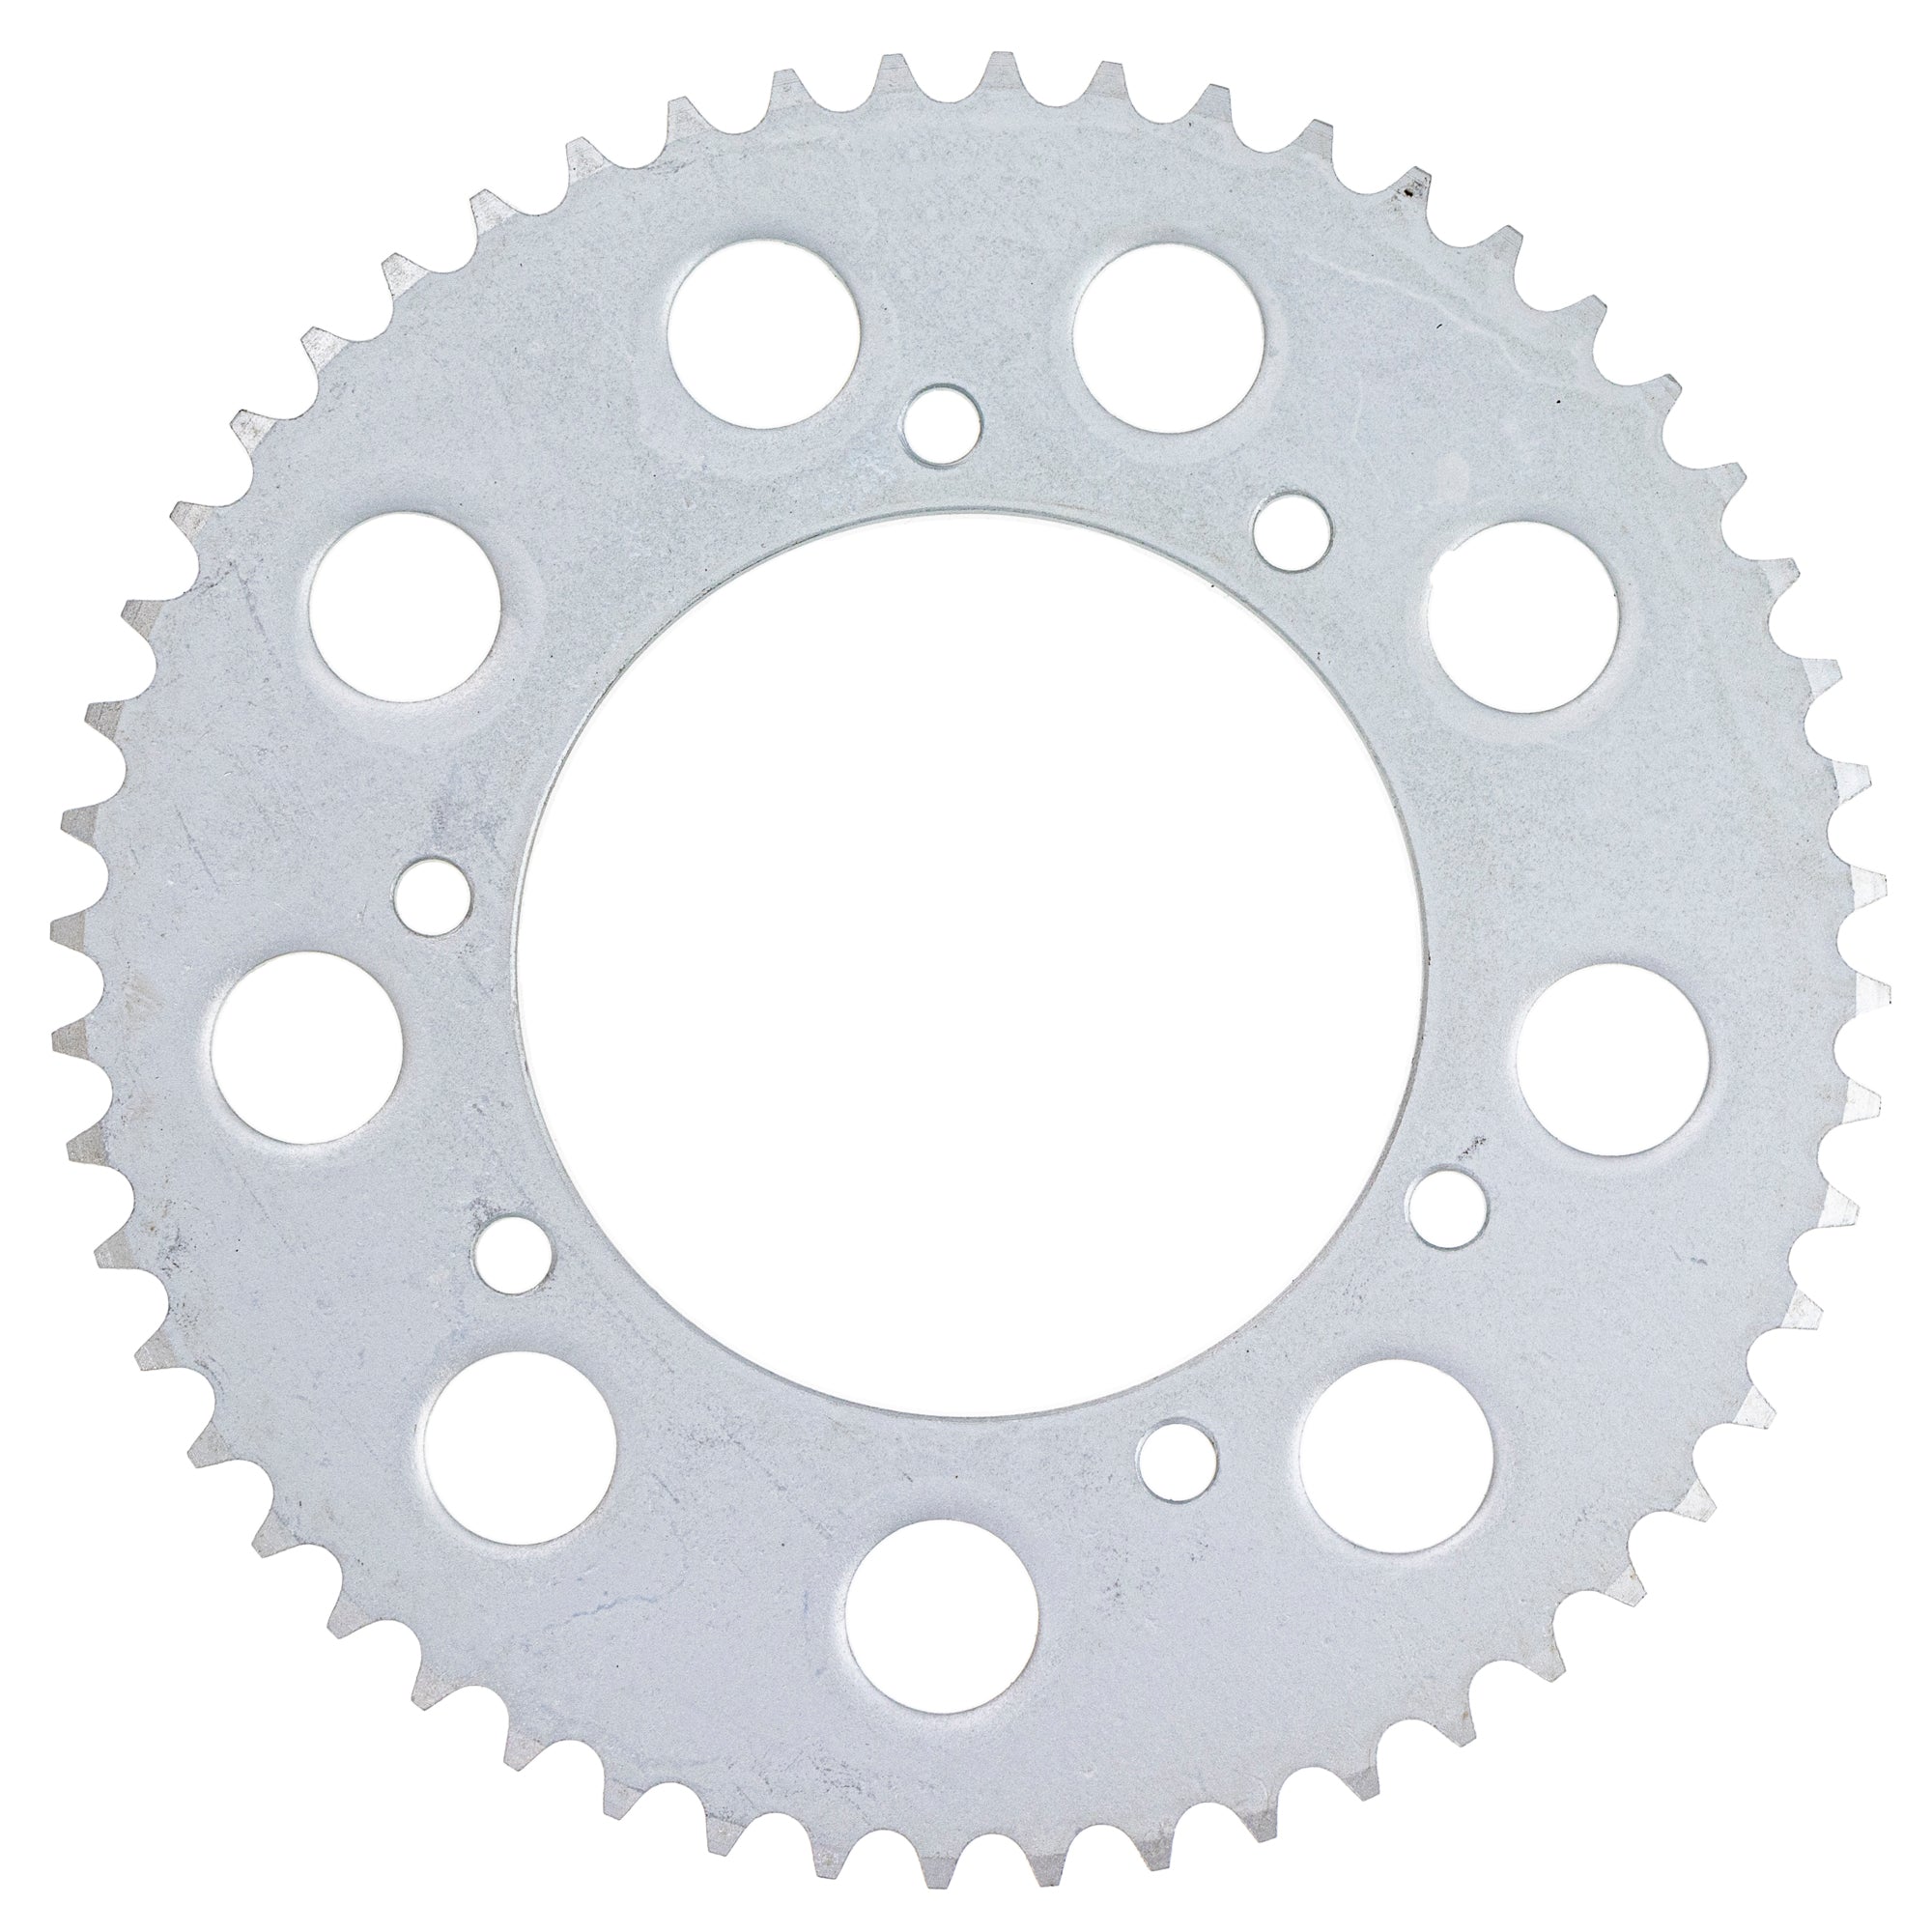 420 Front 12T Rear 52T Tooth Drive Sprocket Kit for Peugeot XR6 50